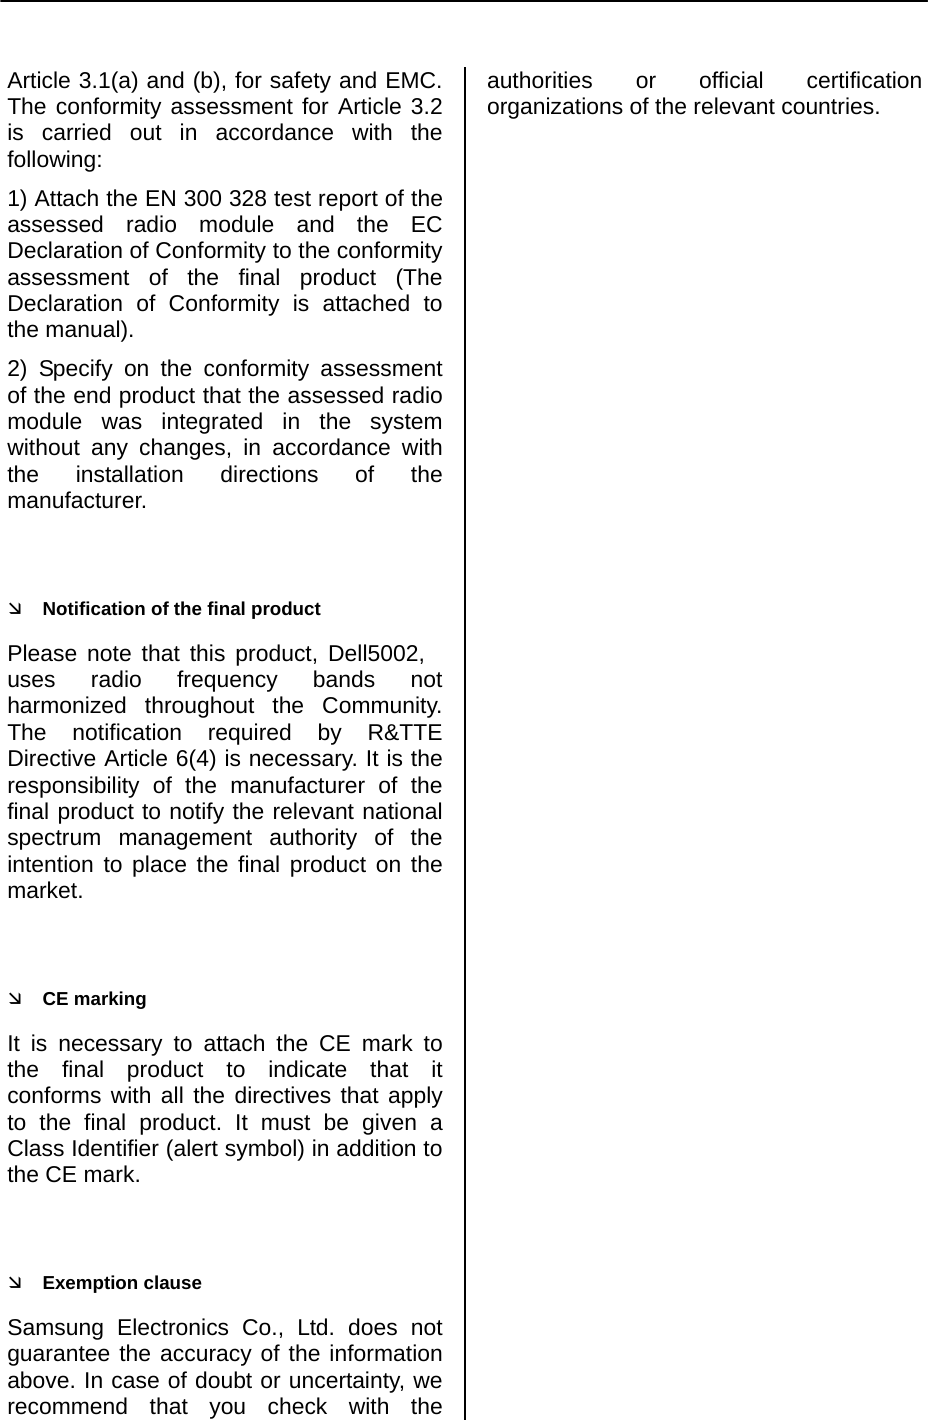     Article 3.1(a) and (b), for safety and EMC. The conformity assessment for Article 3.2 is carried out in accordance with the following: 1) Attach the EN 300 328 test report of the assessed radio module and the EC Declaration of Conformity to the conformity assessment of the final product (The Declaration of Conformity is attached to the manual). 2) Specify on the conformity assessment of the end product that the assessed radio module was integrated in the system without any changes, in accordance with the installation directions of the manufacturer.  Ì Notification of the final product Please note that this product, Dell5002, uses radio frequency bands not harmonized throughout the Community. The notification required by R&amp;TTE Directive Article 6(4) is necessary. It is the responsibility of the manufacturer of the final product to notify the relevant national spectrum management authority of the intention to place the final product on the market.  Ì CE marking It is necessary to attach the CE mark to the final product to indicate that it conforms with all the directives that apply to the final product. It must be given a Class Identifier (alert symbol) in addition to the CE mark.  Ì Exemption clause Samsung Electronics Co., Ltd. does not guarantee the accuracy of the information above. In case of doubt or uncertainty, we recommend that you check with the authorities or official certification organizations of the relevant countries.  